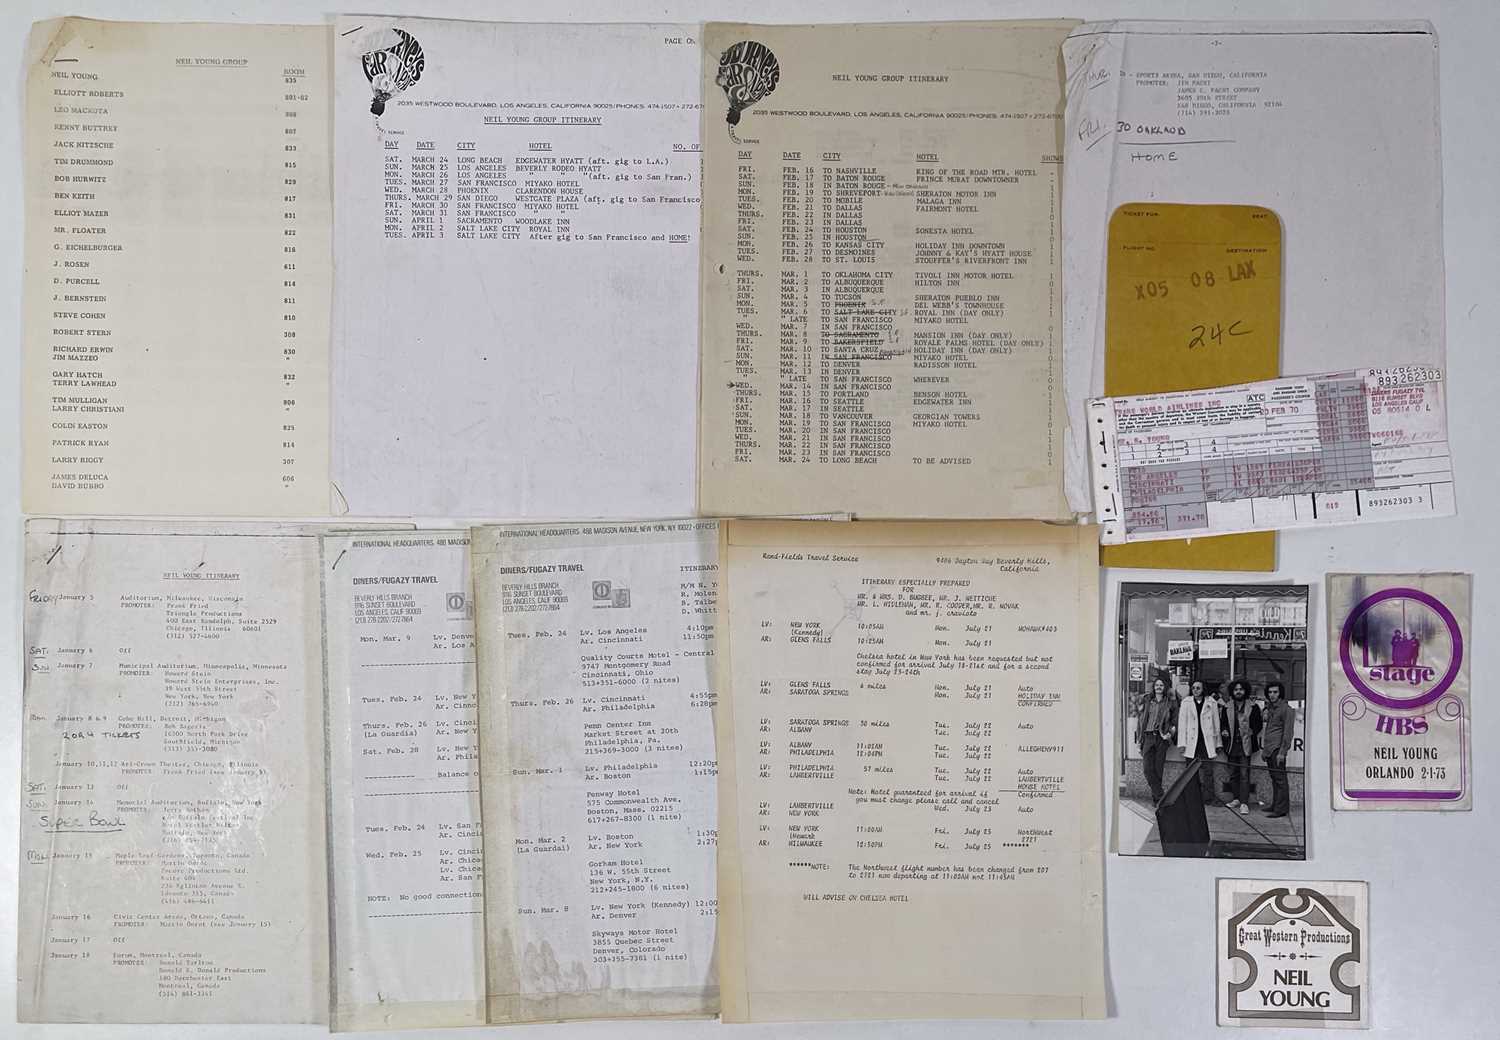 Lot 491 - NEIL YOUNG AND CRAZY HORSE - ORIGINAL 1970 TOUR ITINERARY / PLANE TICKET / PASSES.